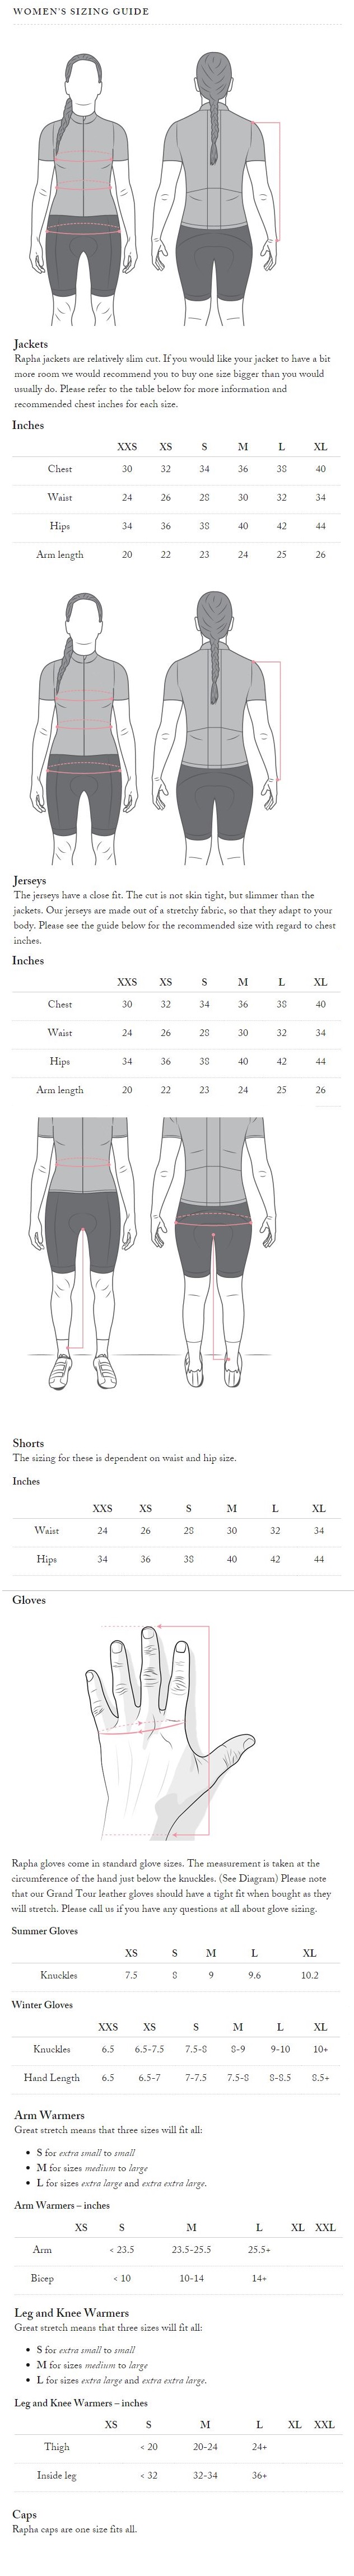 Rapha Size Guide